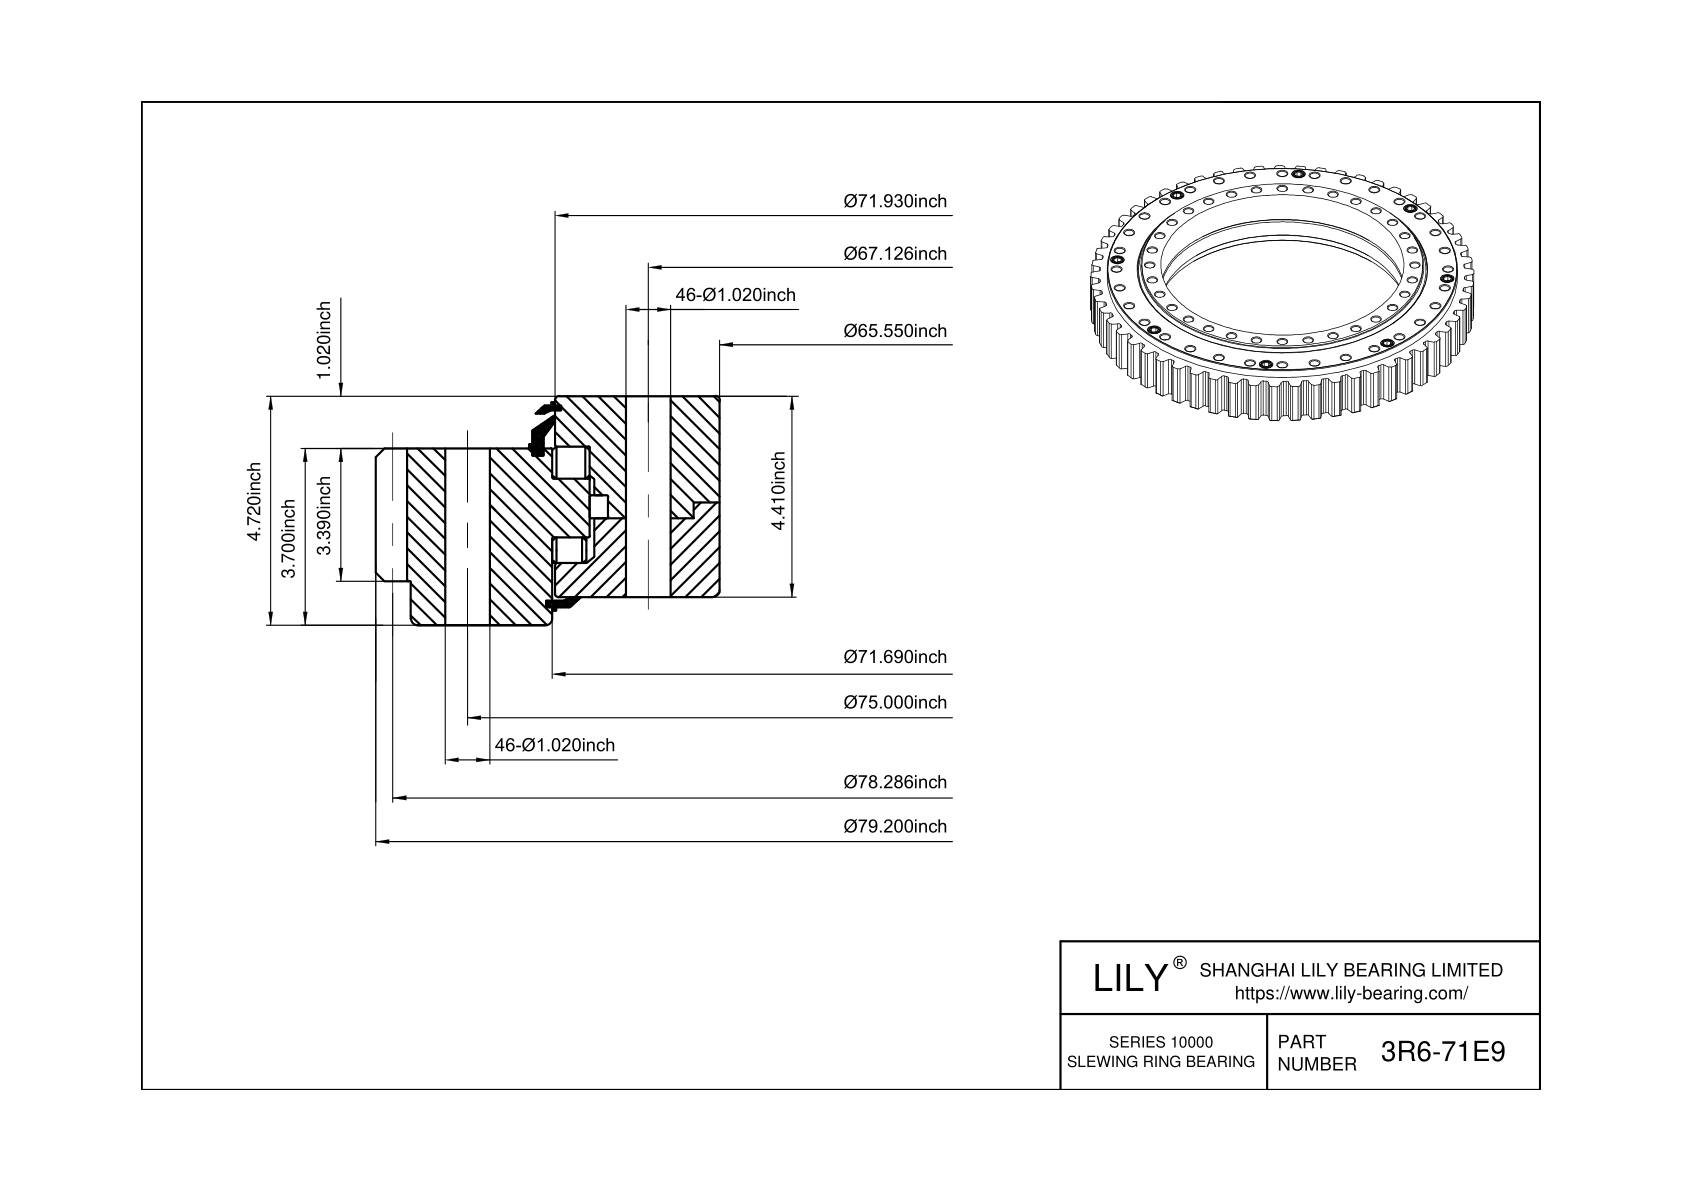 3R6-71E9 Three-Row Cross Roller Slewing Ring Bearing cad drawing